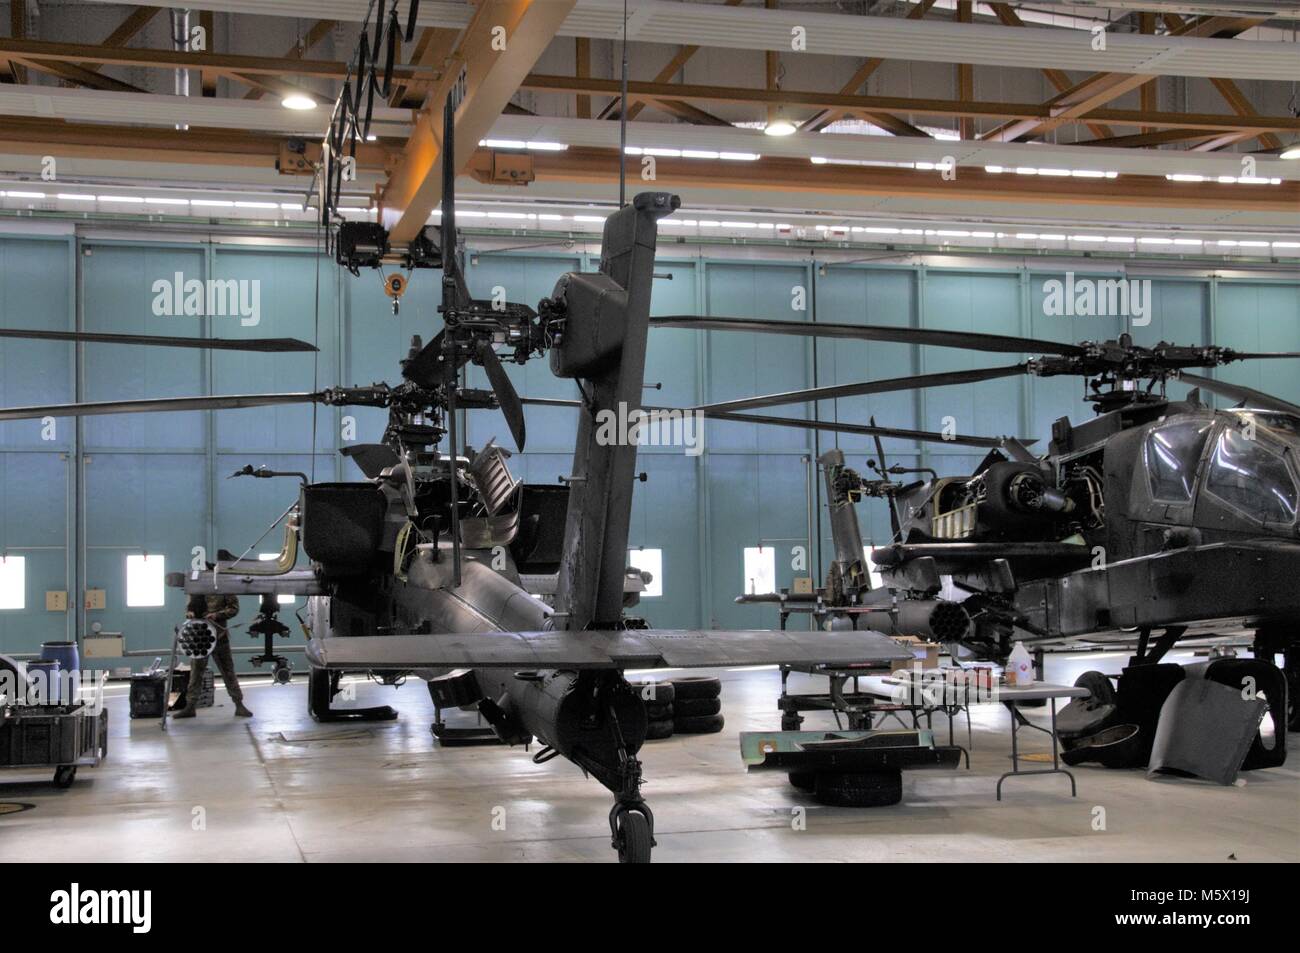 Soldiers of 1st Battalion, 3rd Aviation Regiment (Attack Reconnaissance) conduct 500 hours phase maintenance on an AH-64 Apache helicopter at Katterbach Army Airfield, Germany, Feb. 23, 2018. Phase maintenance inspections occur at regular intervals on all aircraft in order to keep them operational. (U.S. Army photo by Charles Rosemond) Stock Photo